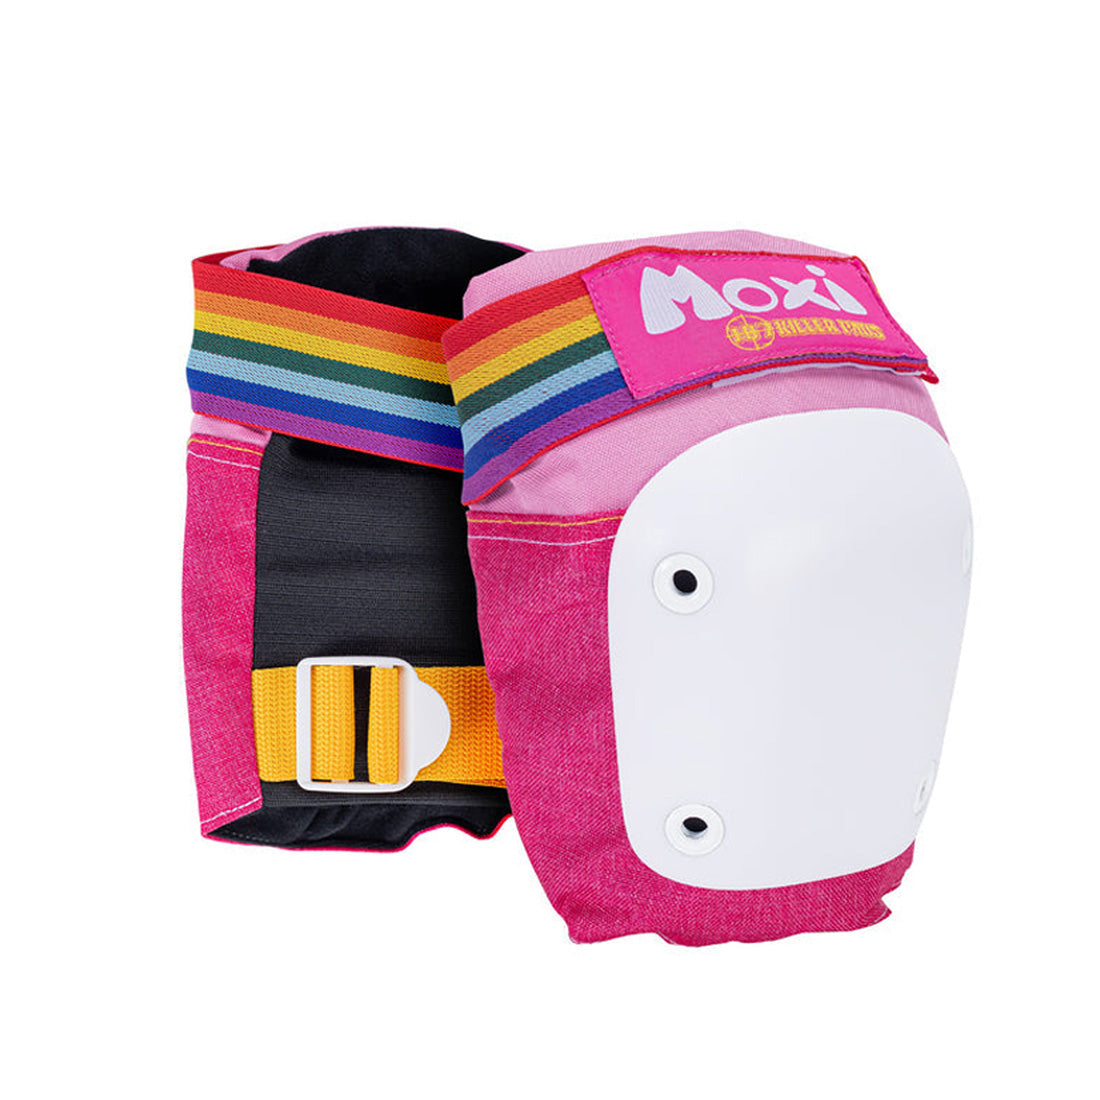 187 Six-Pack Adult - Moxi Pink Protective Gear